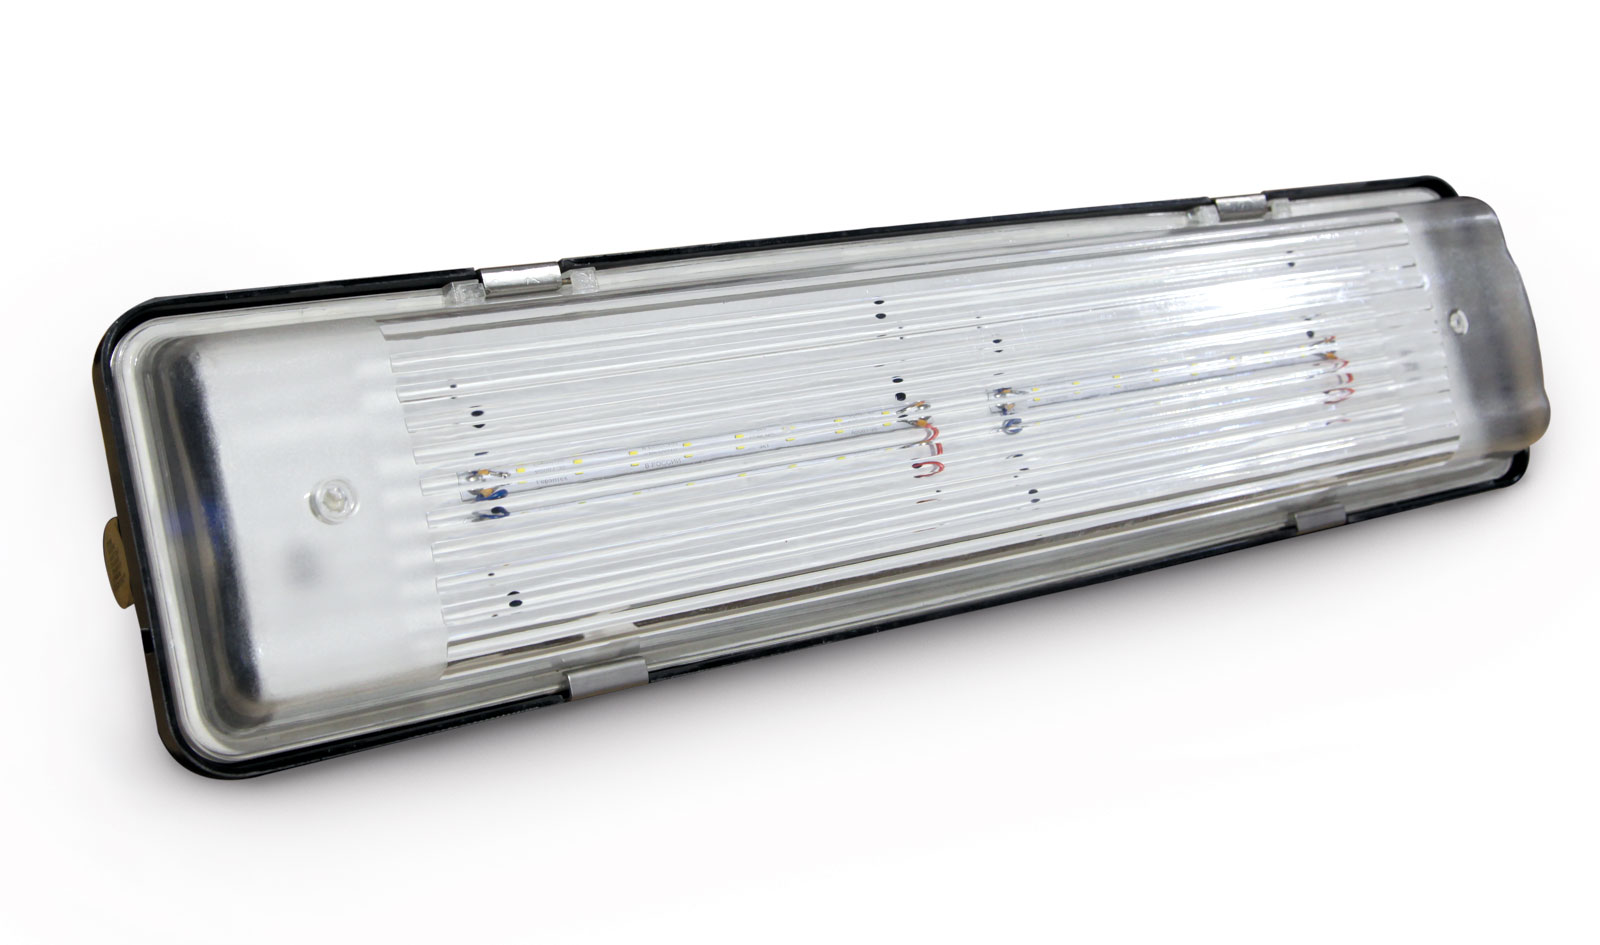 Explosion-proof linear LED light fixtures series SGL01...S